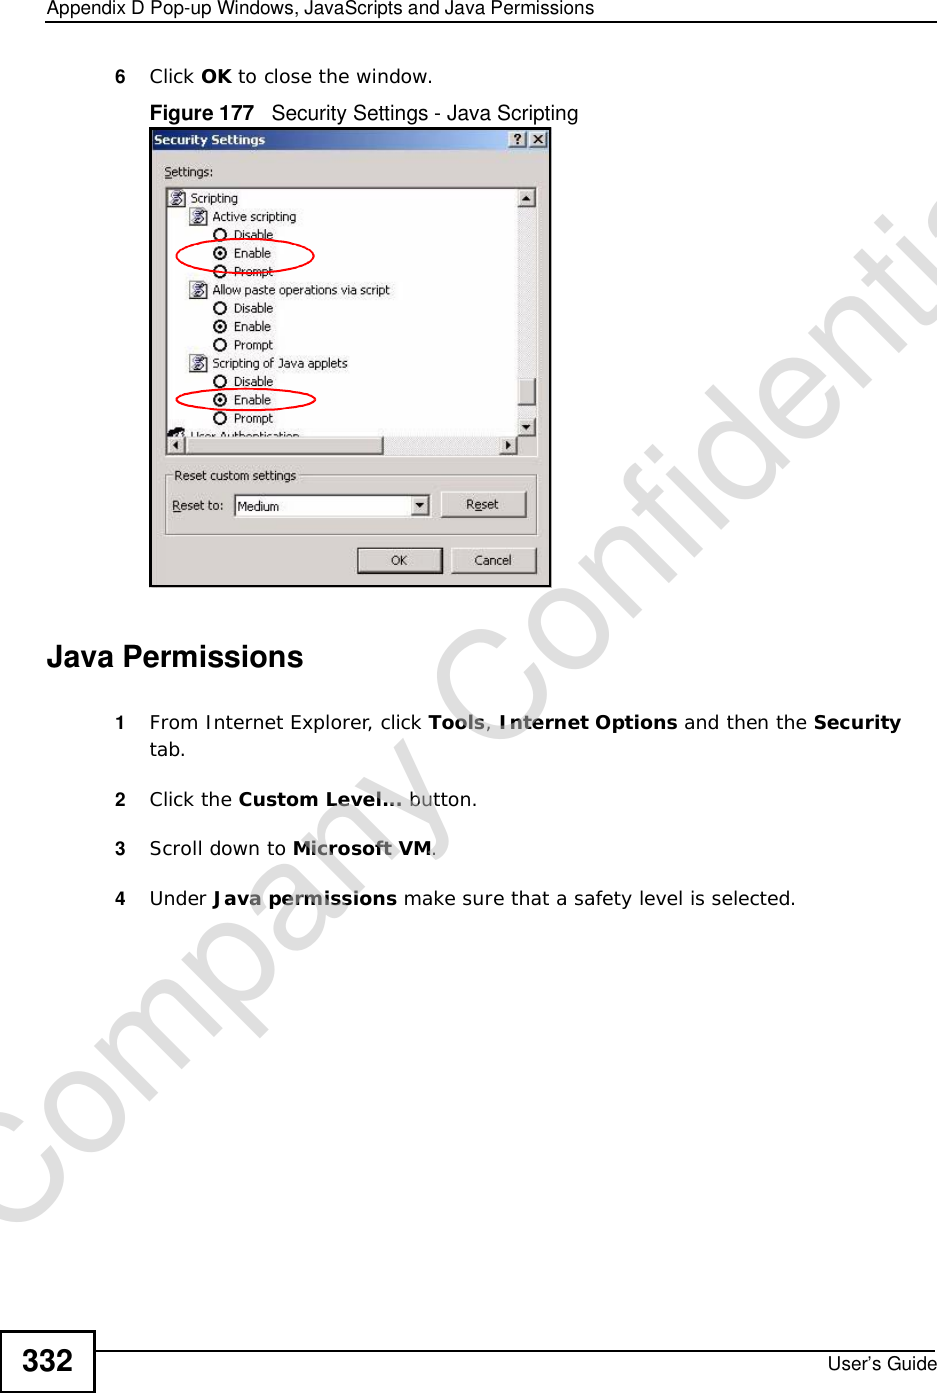 Appendix DPop-up Windows, JavaScripts and Java PermissionsUser’s Guide3326Click OK to close the window.Figure 177   Security Settings - Java ScriptingJava Permissions1From Internet Explorer, click Tools,Internet Options and then the Securitytab. 2Click the Custom Level... button. 3Scroll down to Microsoft VM.4Under Java permissions make sure that a safety level is selected.Company Confidential